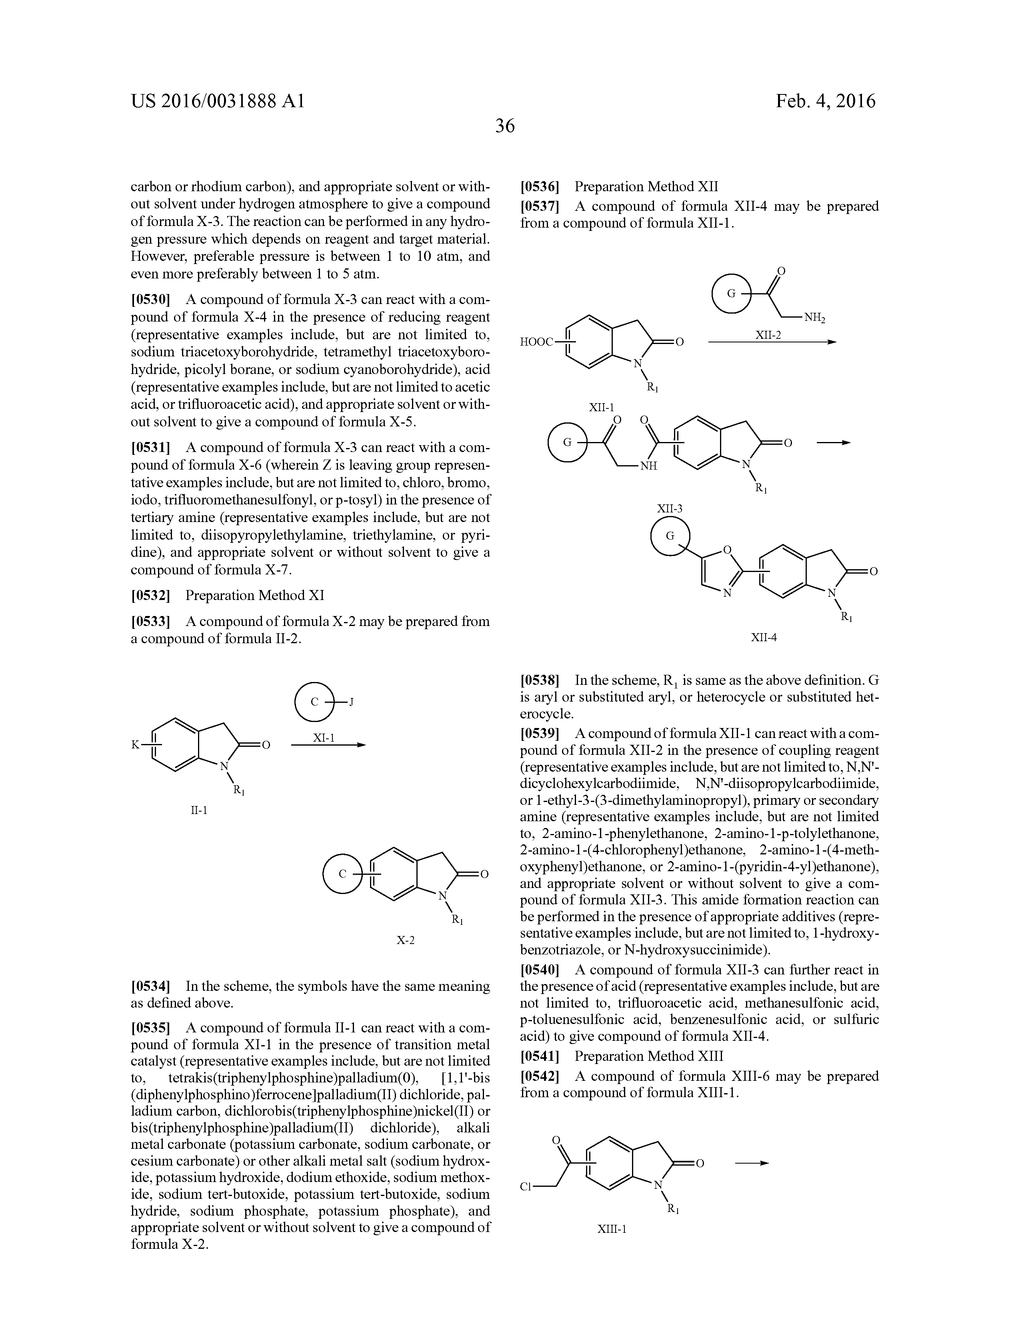 3-(ARYL OR HETEROARYL) METHYLENEINDOLIN-2-ONE DERIVATIVES AS INHIBITORS OF     CANCER STEM CELL PATHWAY KINASES FOR THE TREATMENT OF CANCER - diagram, schematic, and image 38